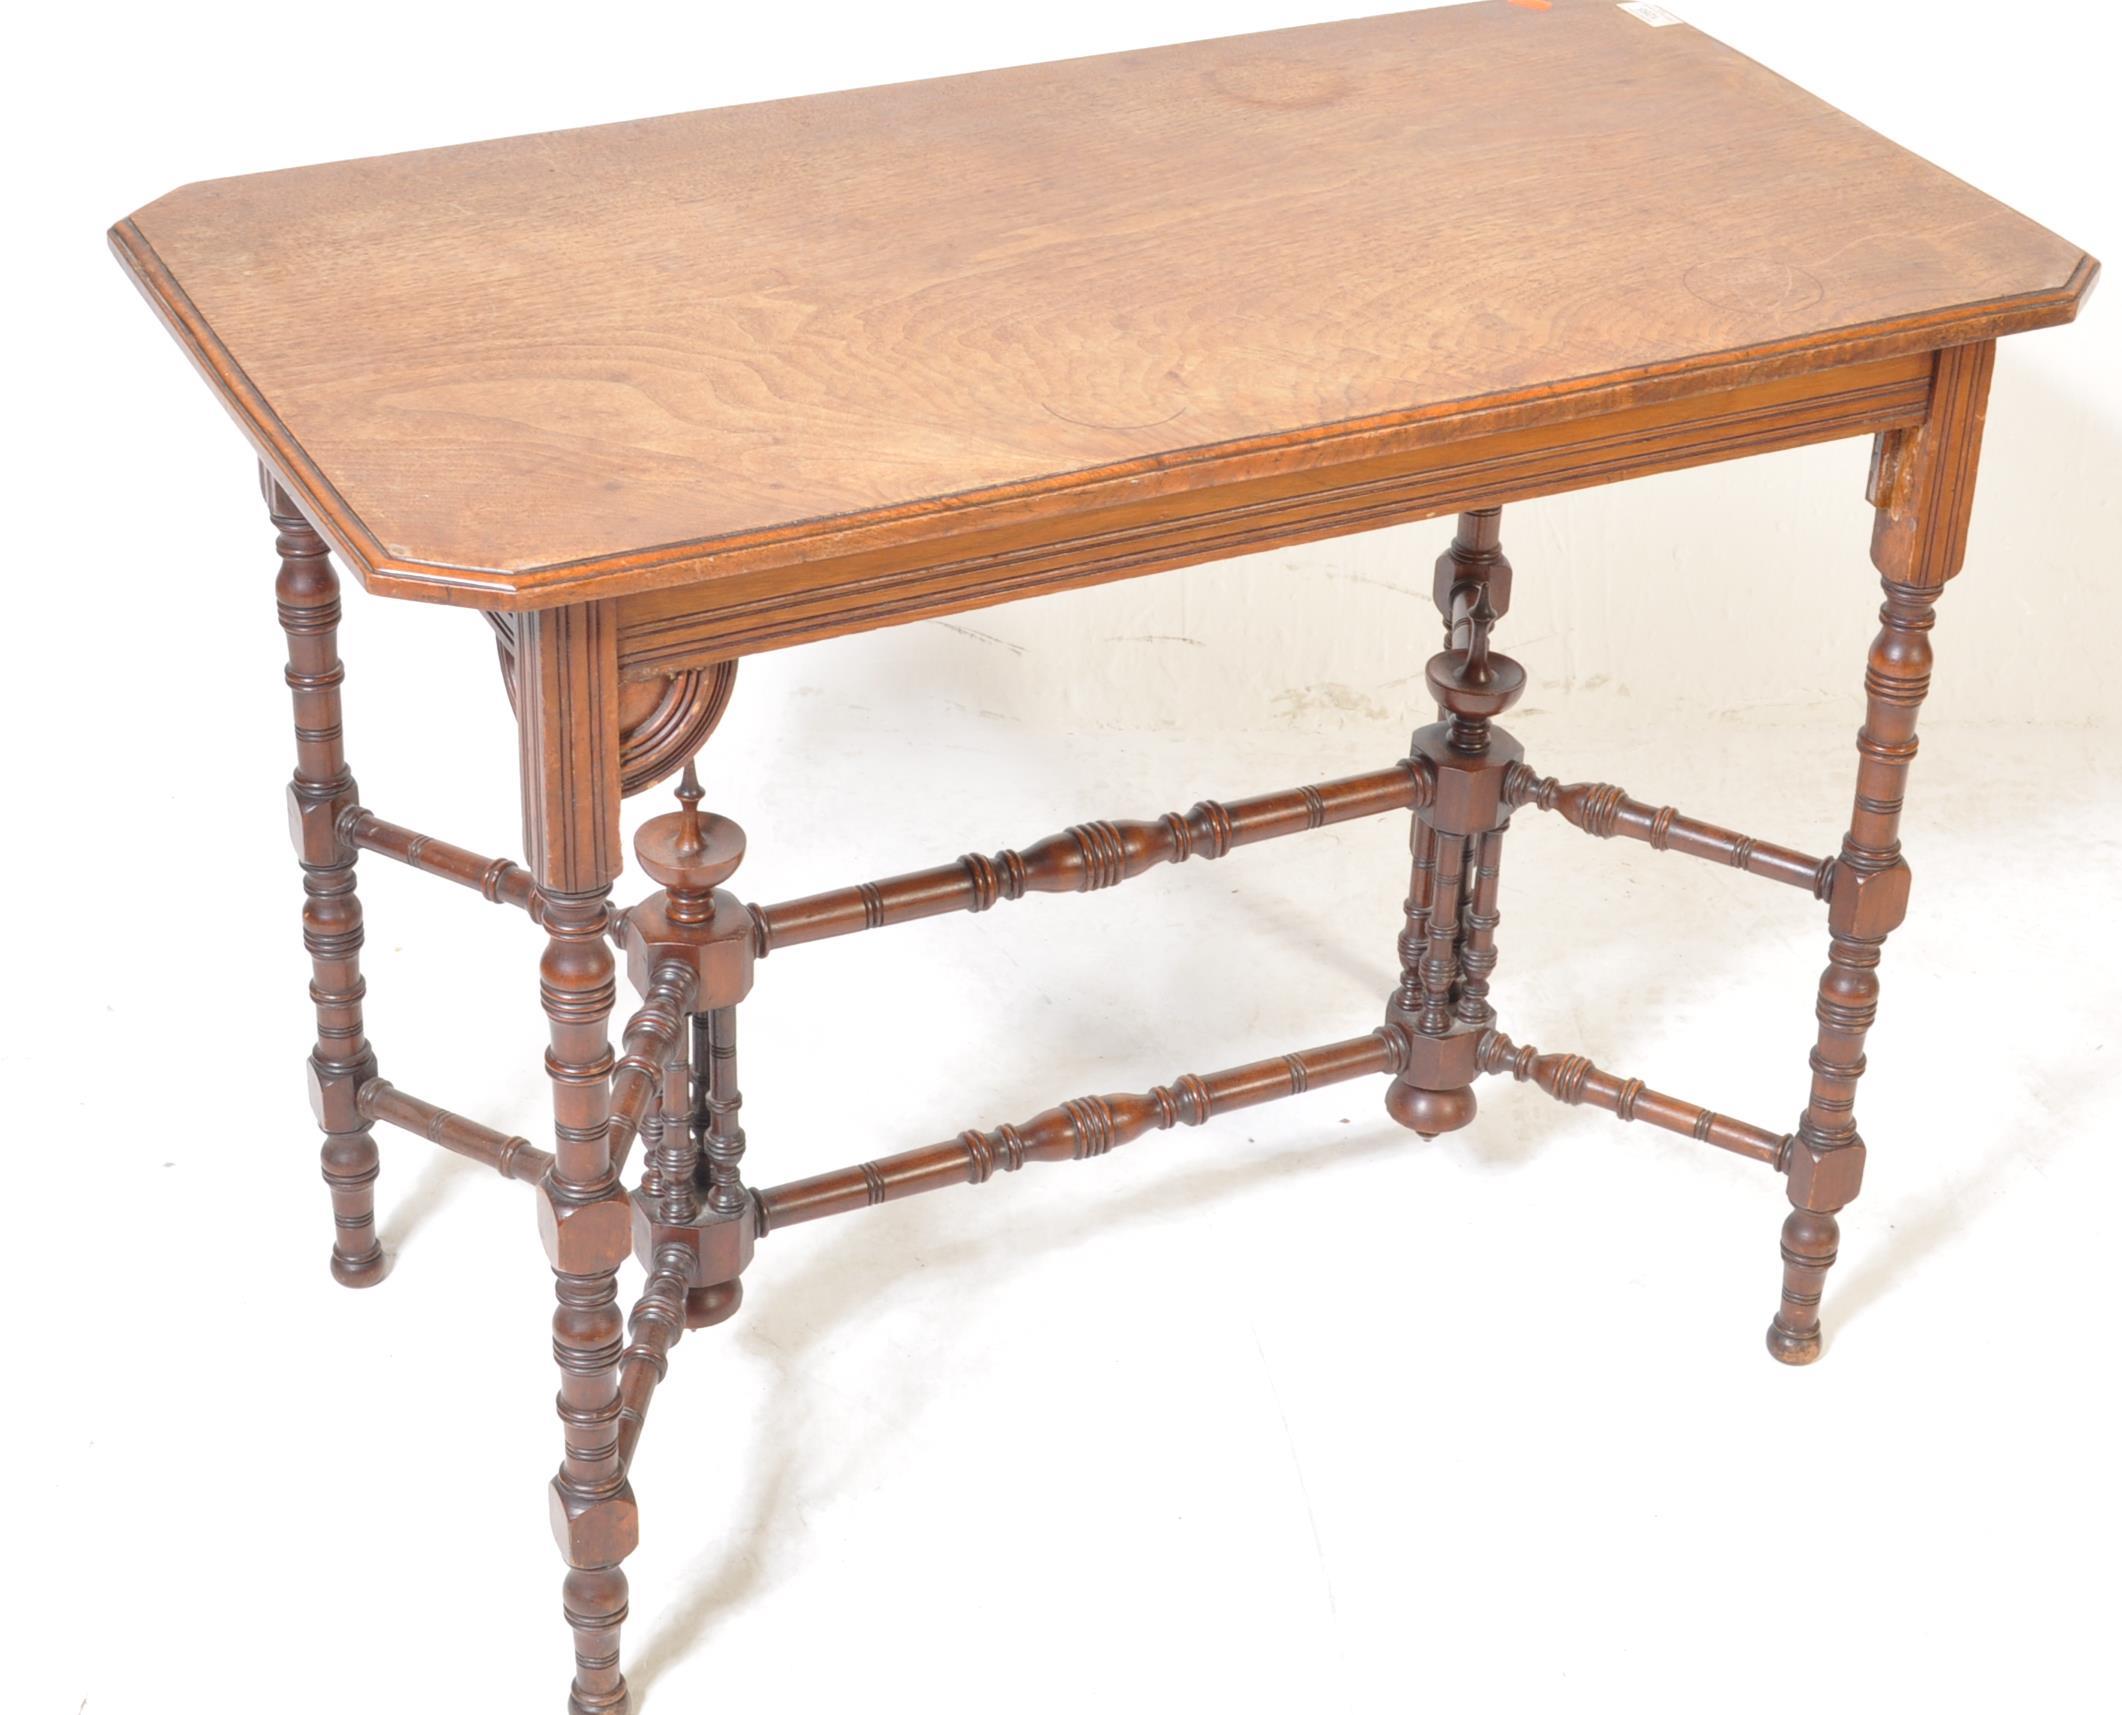 19TH CENTURY VICTORIAN AESTHETIC MOVEMENT HALL TABLE IN THE MANNER OF E W GODWIN - Image 2 of 4